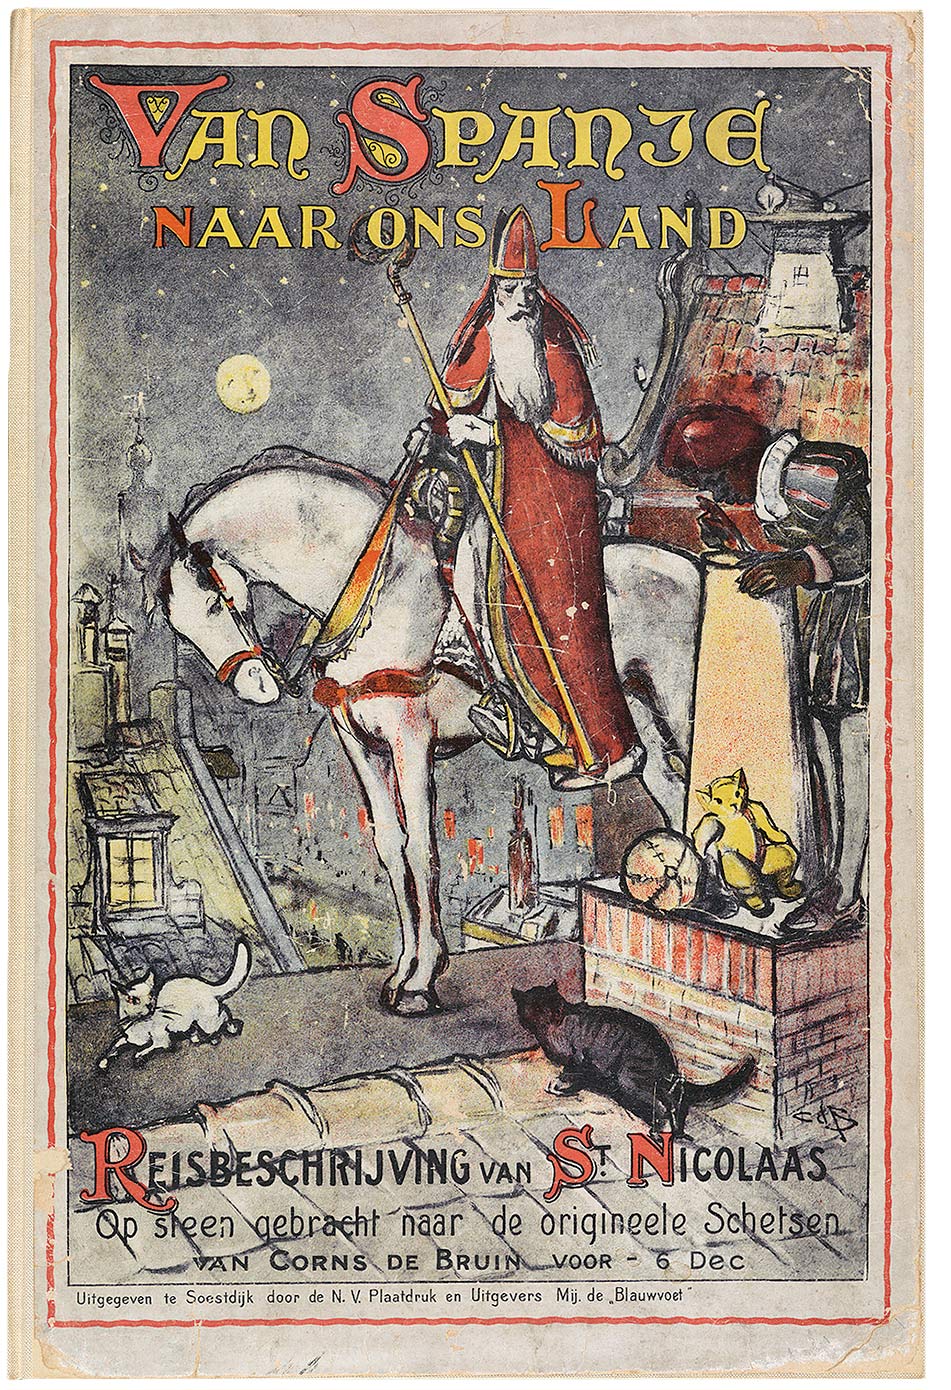 A children’s book from the 1920s that tells the story  of Saint Nicholas and Zwarte Piet. The cover reads, “From Spain to our country. Description of the journey of St. Nicolaas/lithograph based on original sketches for December 6th made by Corns de Bruin.” (Used courtesy of Koninklijke Bibliotheek, National Library of the Netherlands.)